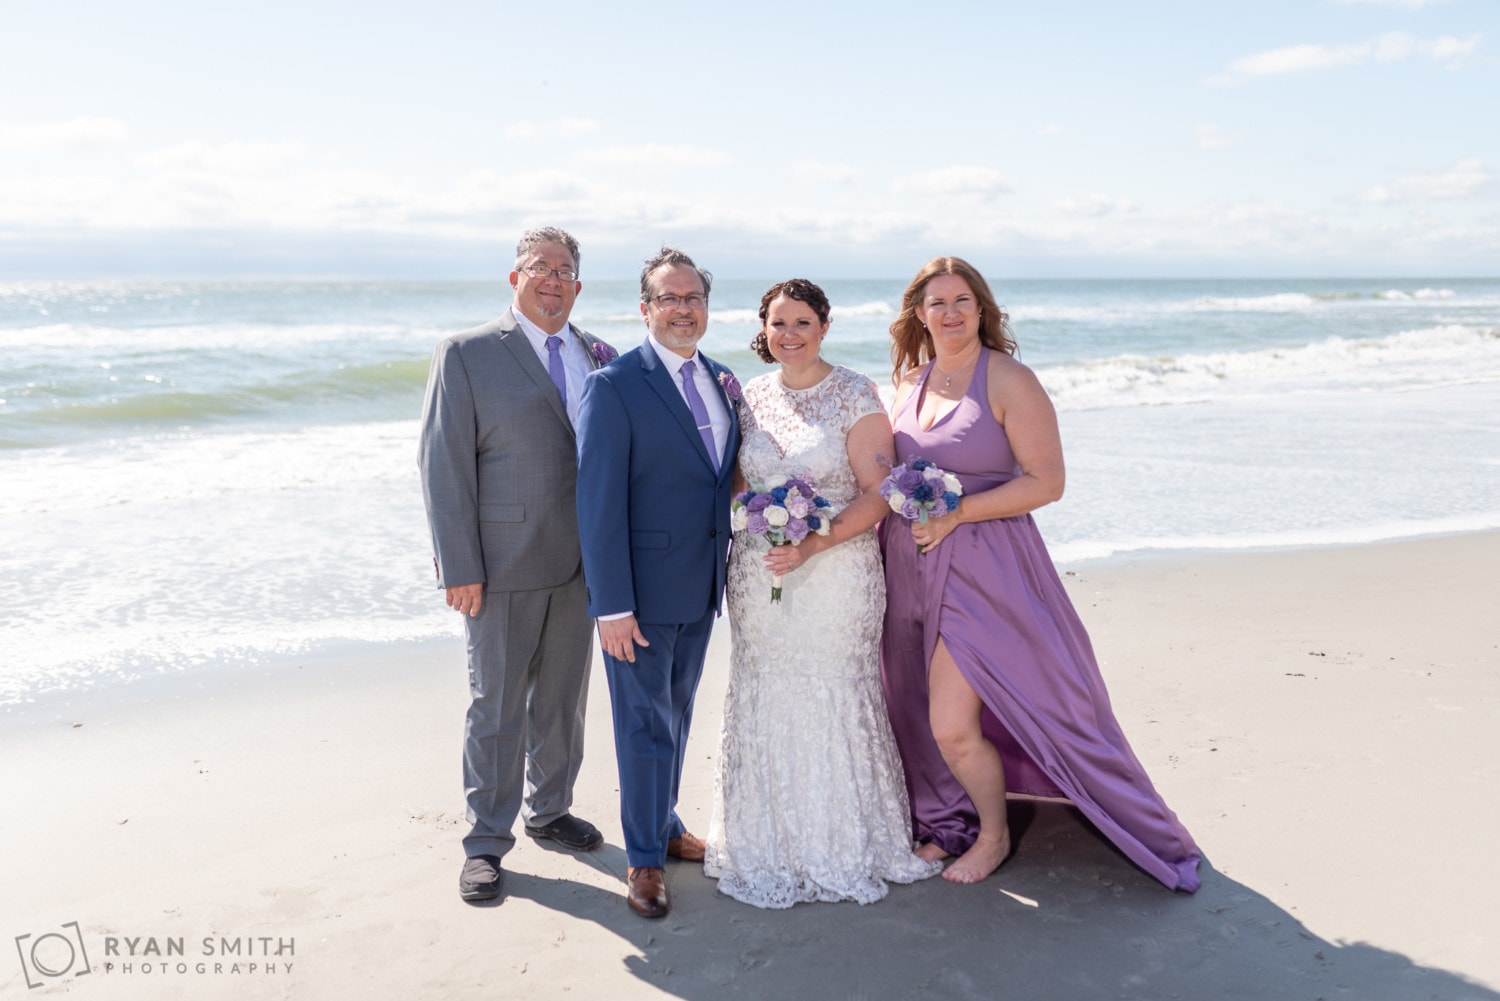 Midday portrait of wedding party on the beach - 21 Main Events